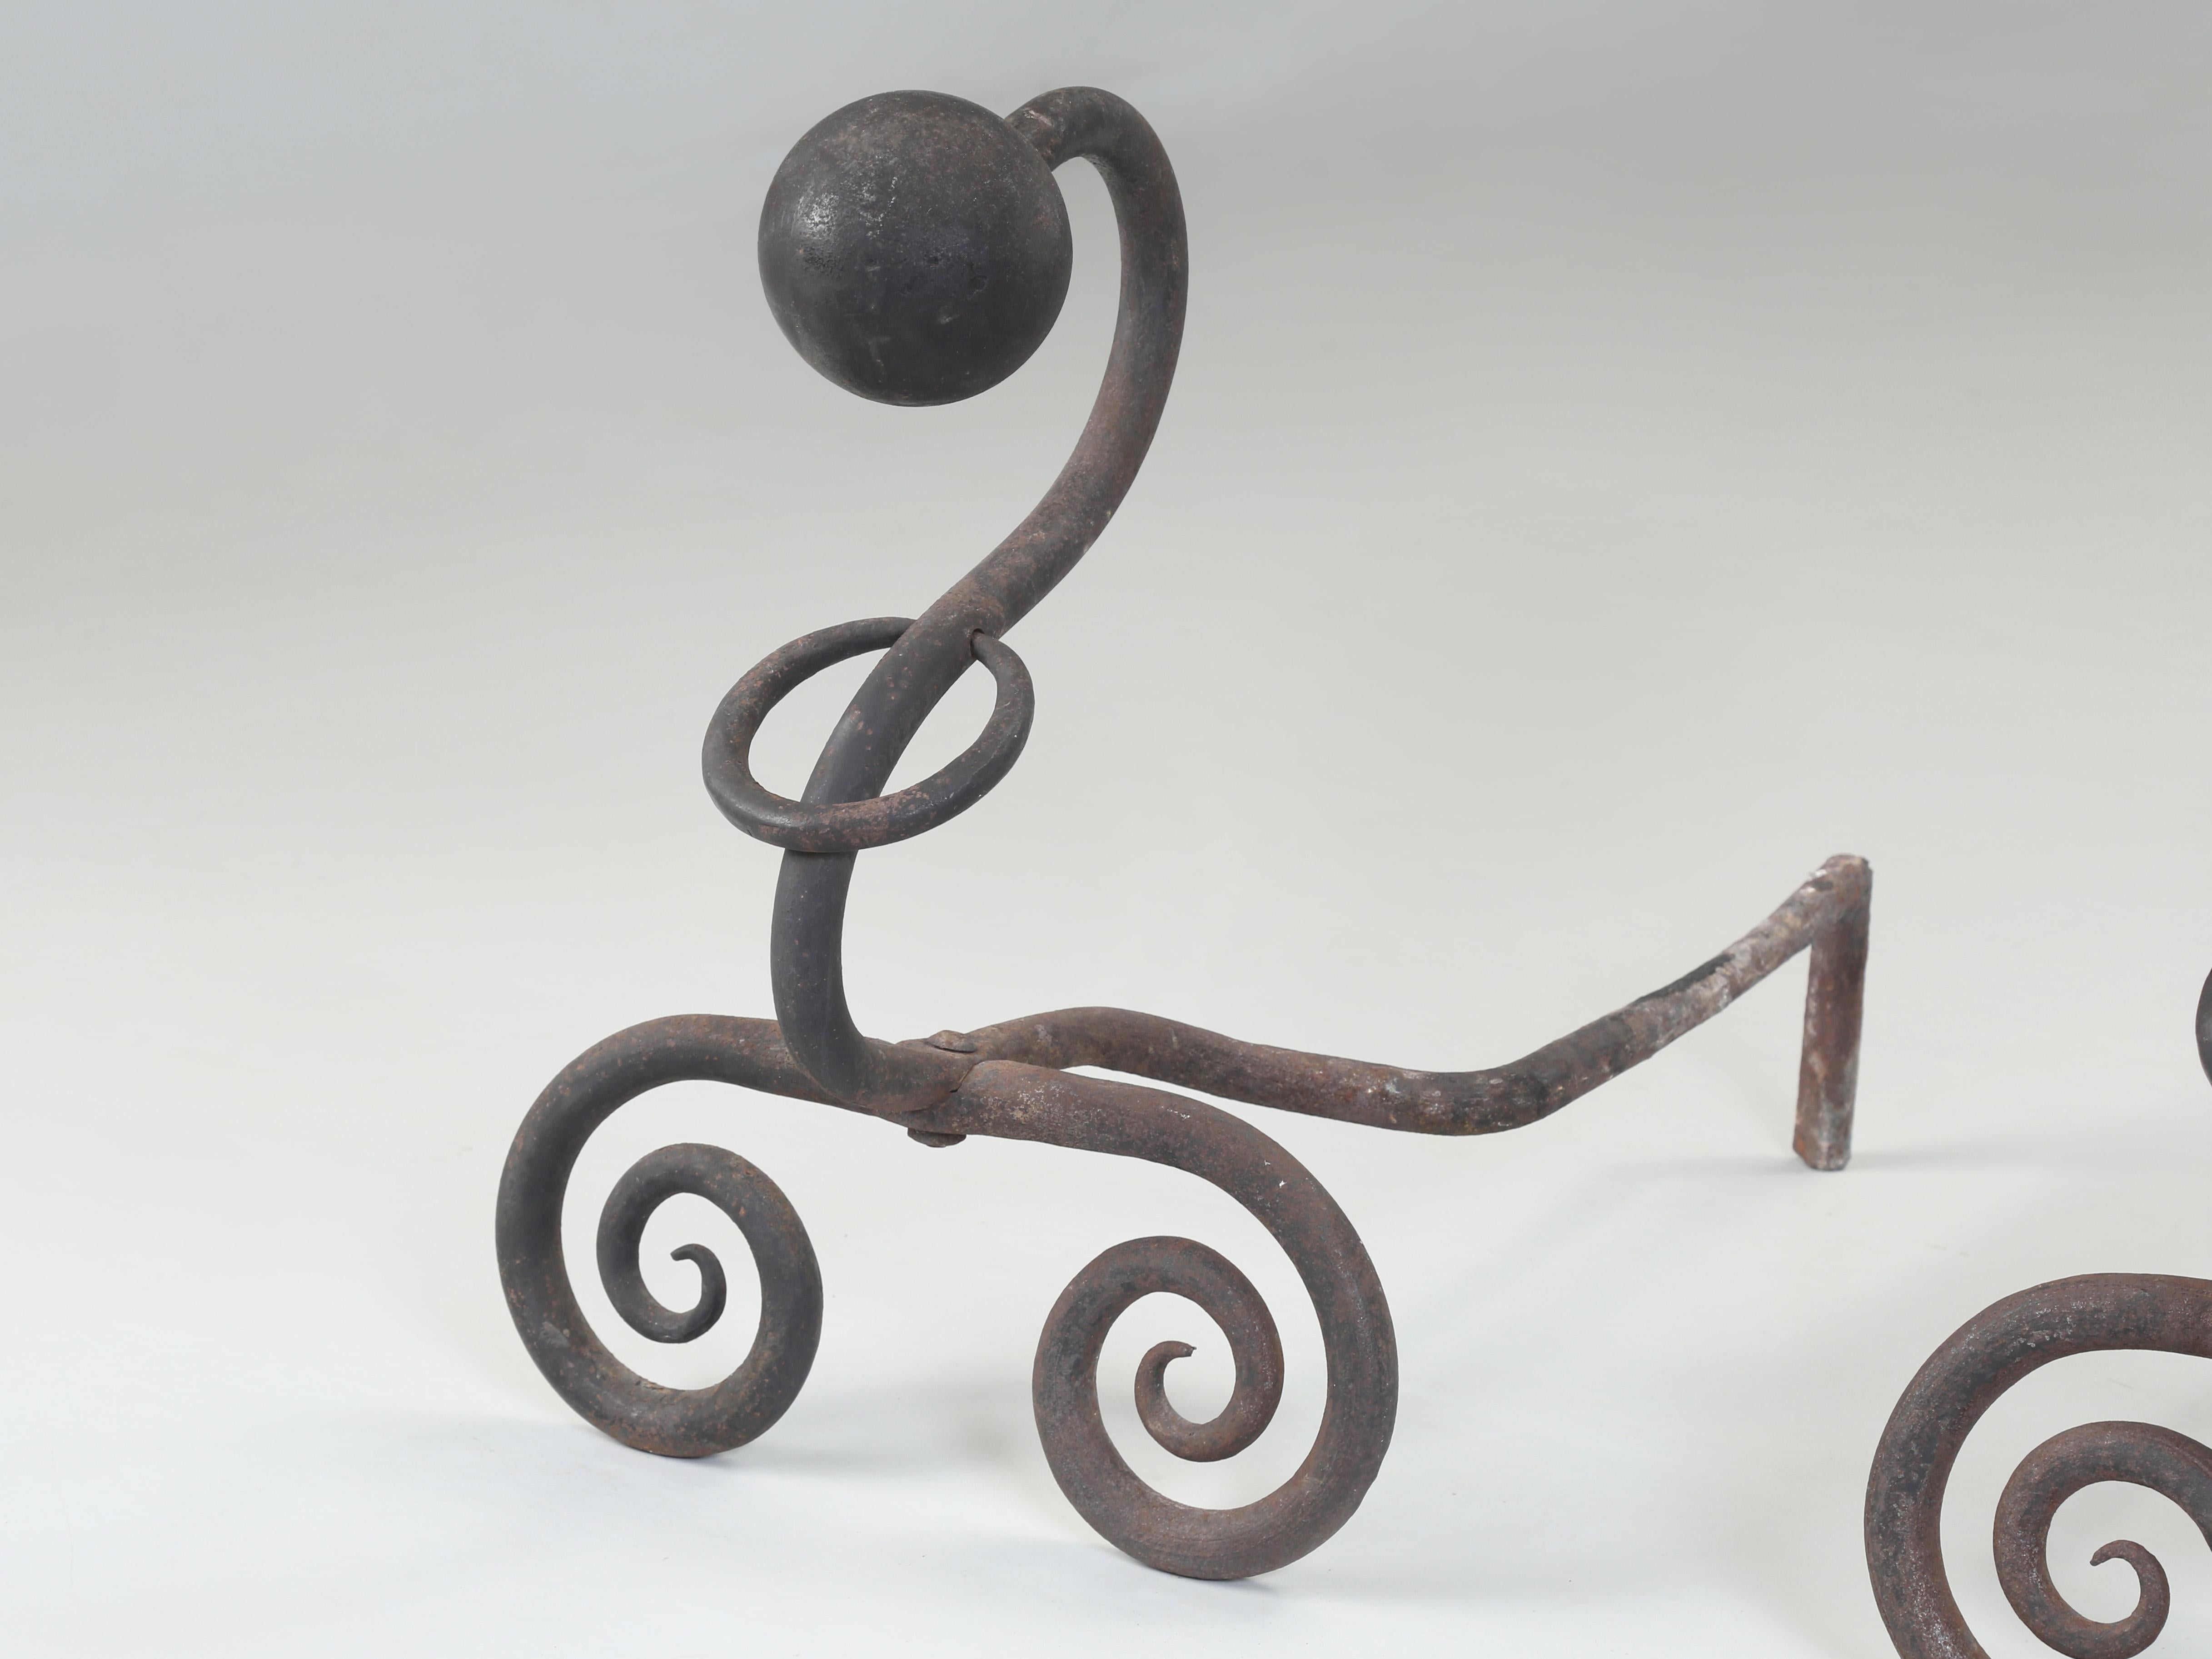 Wrought Iron Fireplace Andirons. Modernist Curled Form with Sphere Top c1940's In Good Condition For Sale In Chicago, IL